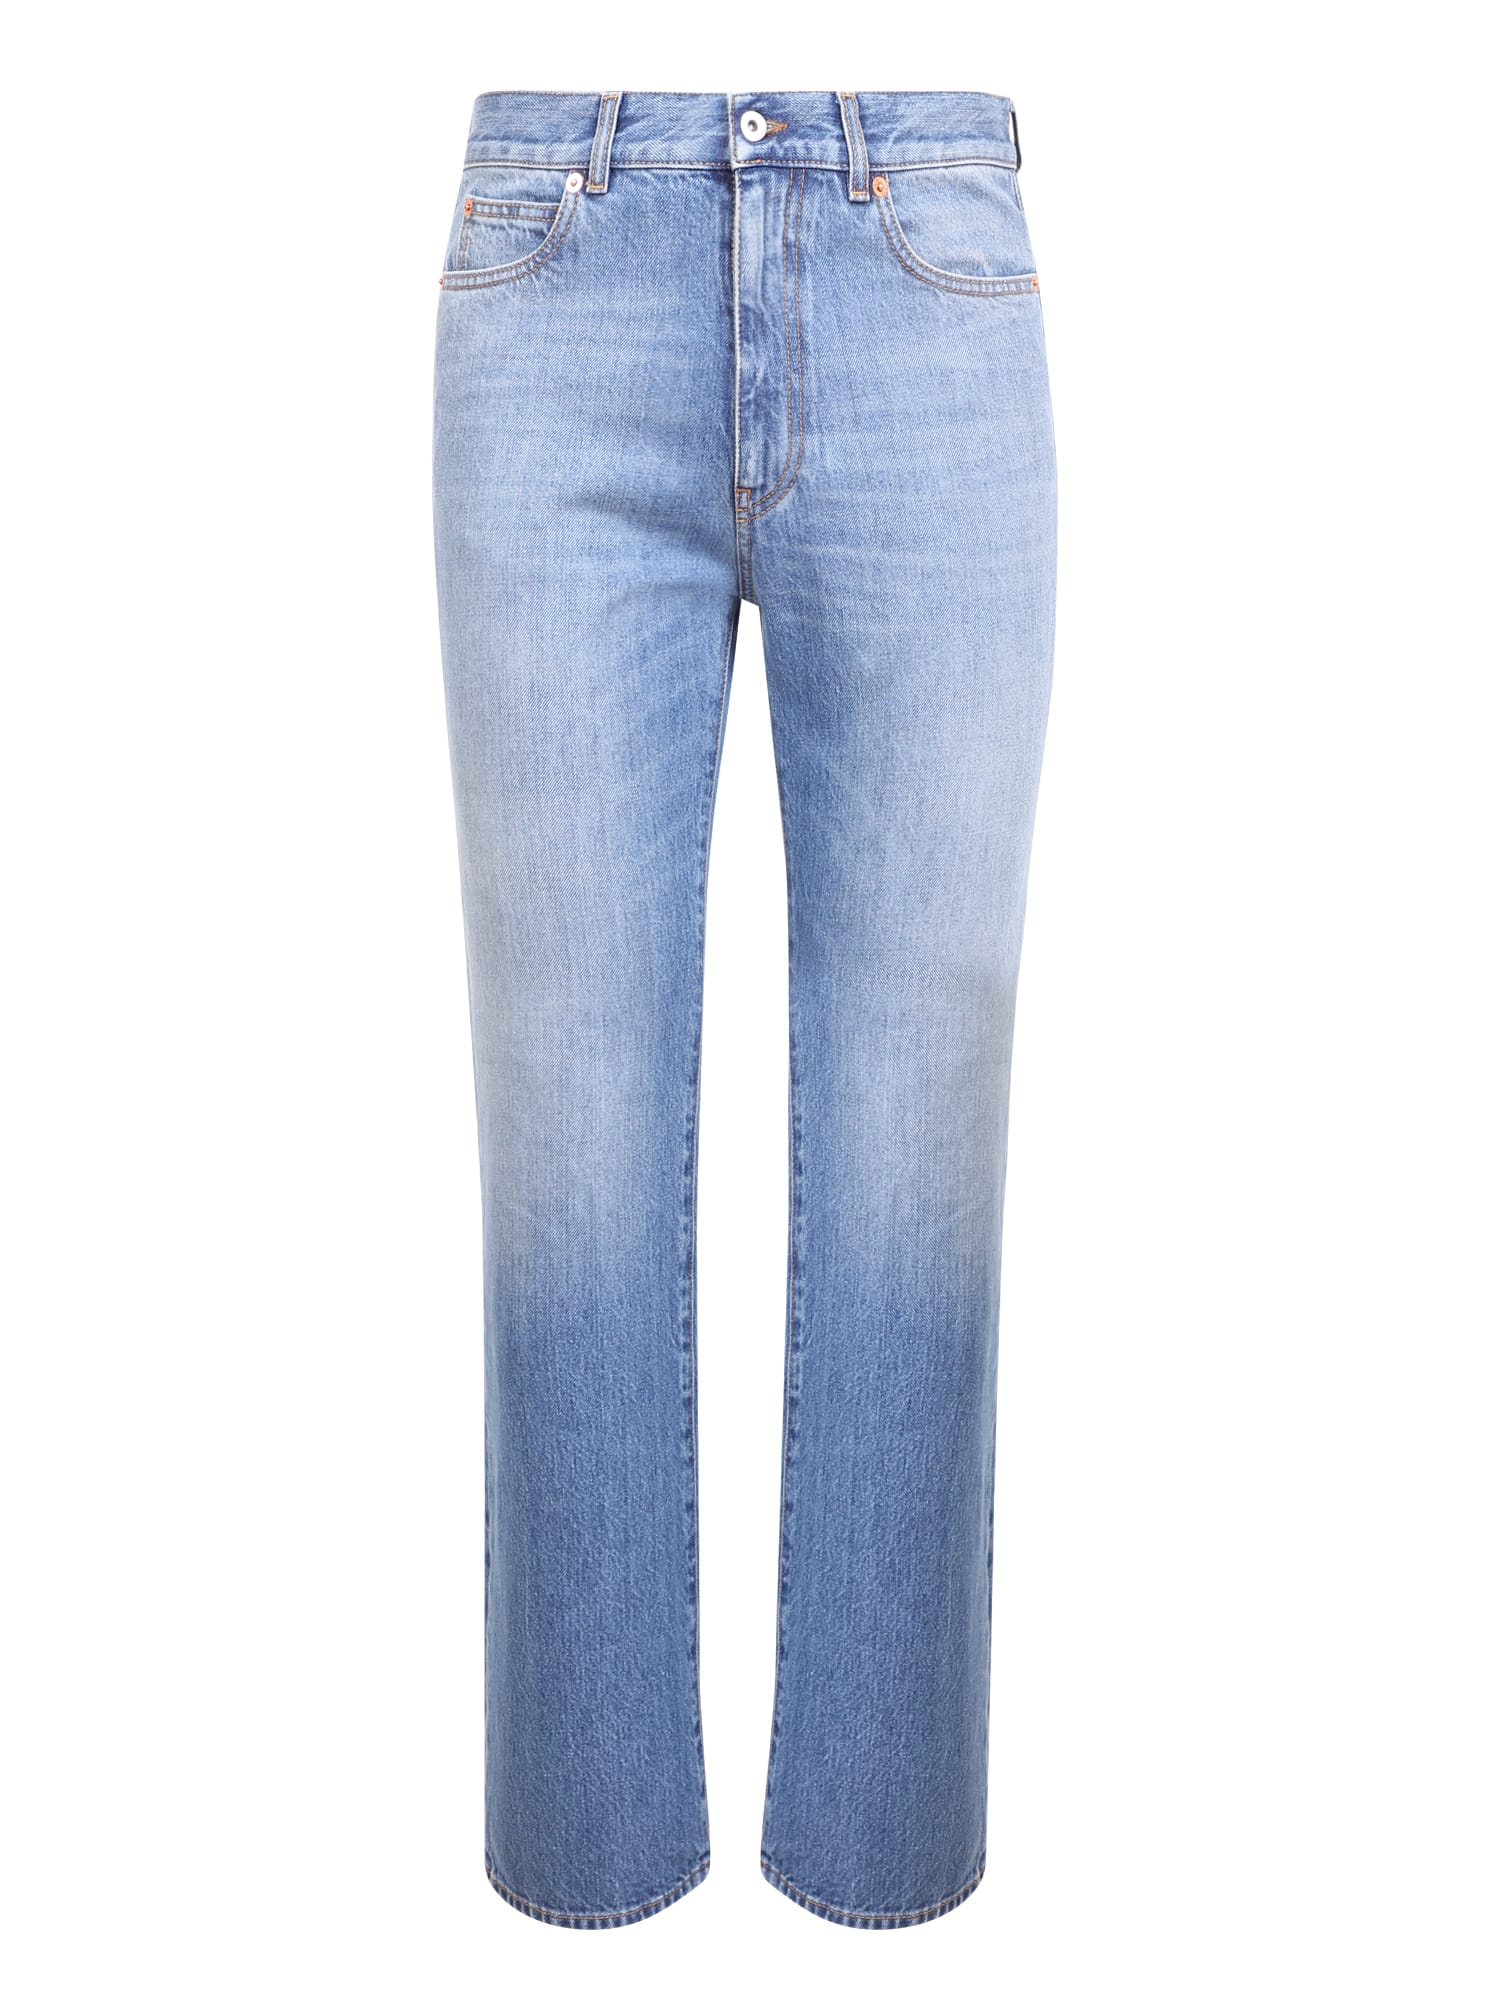 Valentino Flared Jeans